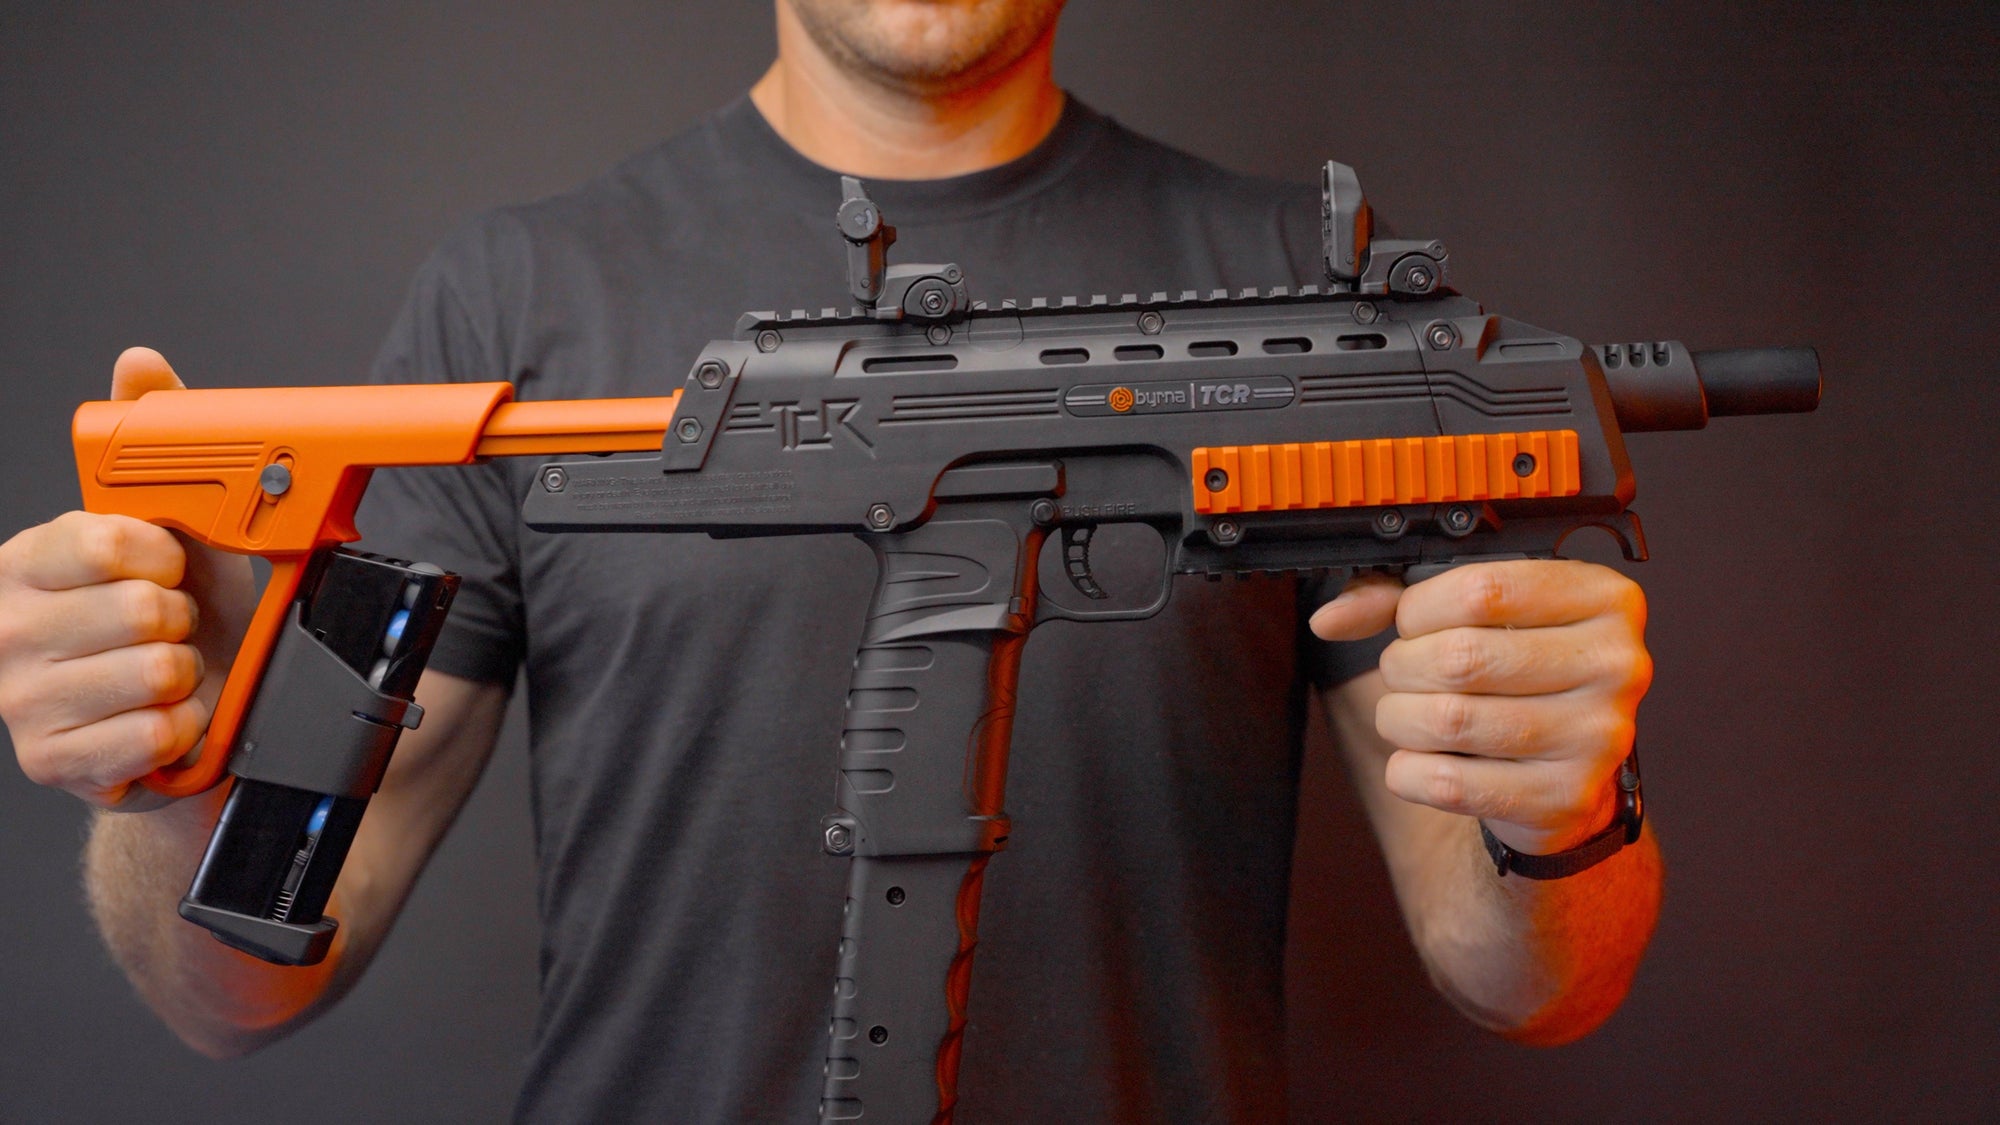 Features of the Byrna TCR - Tactical Compact Rifle